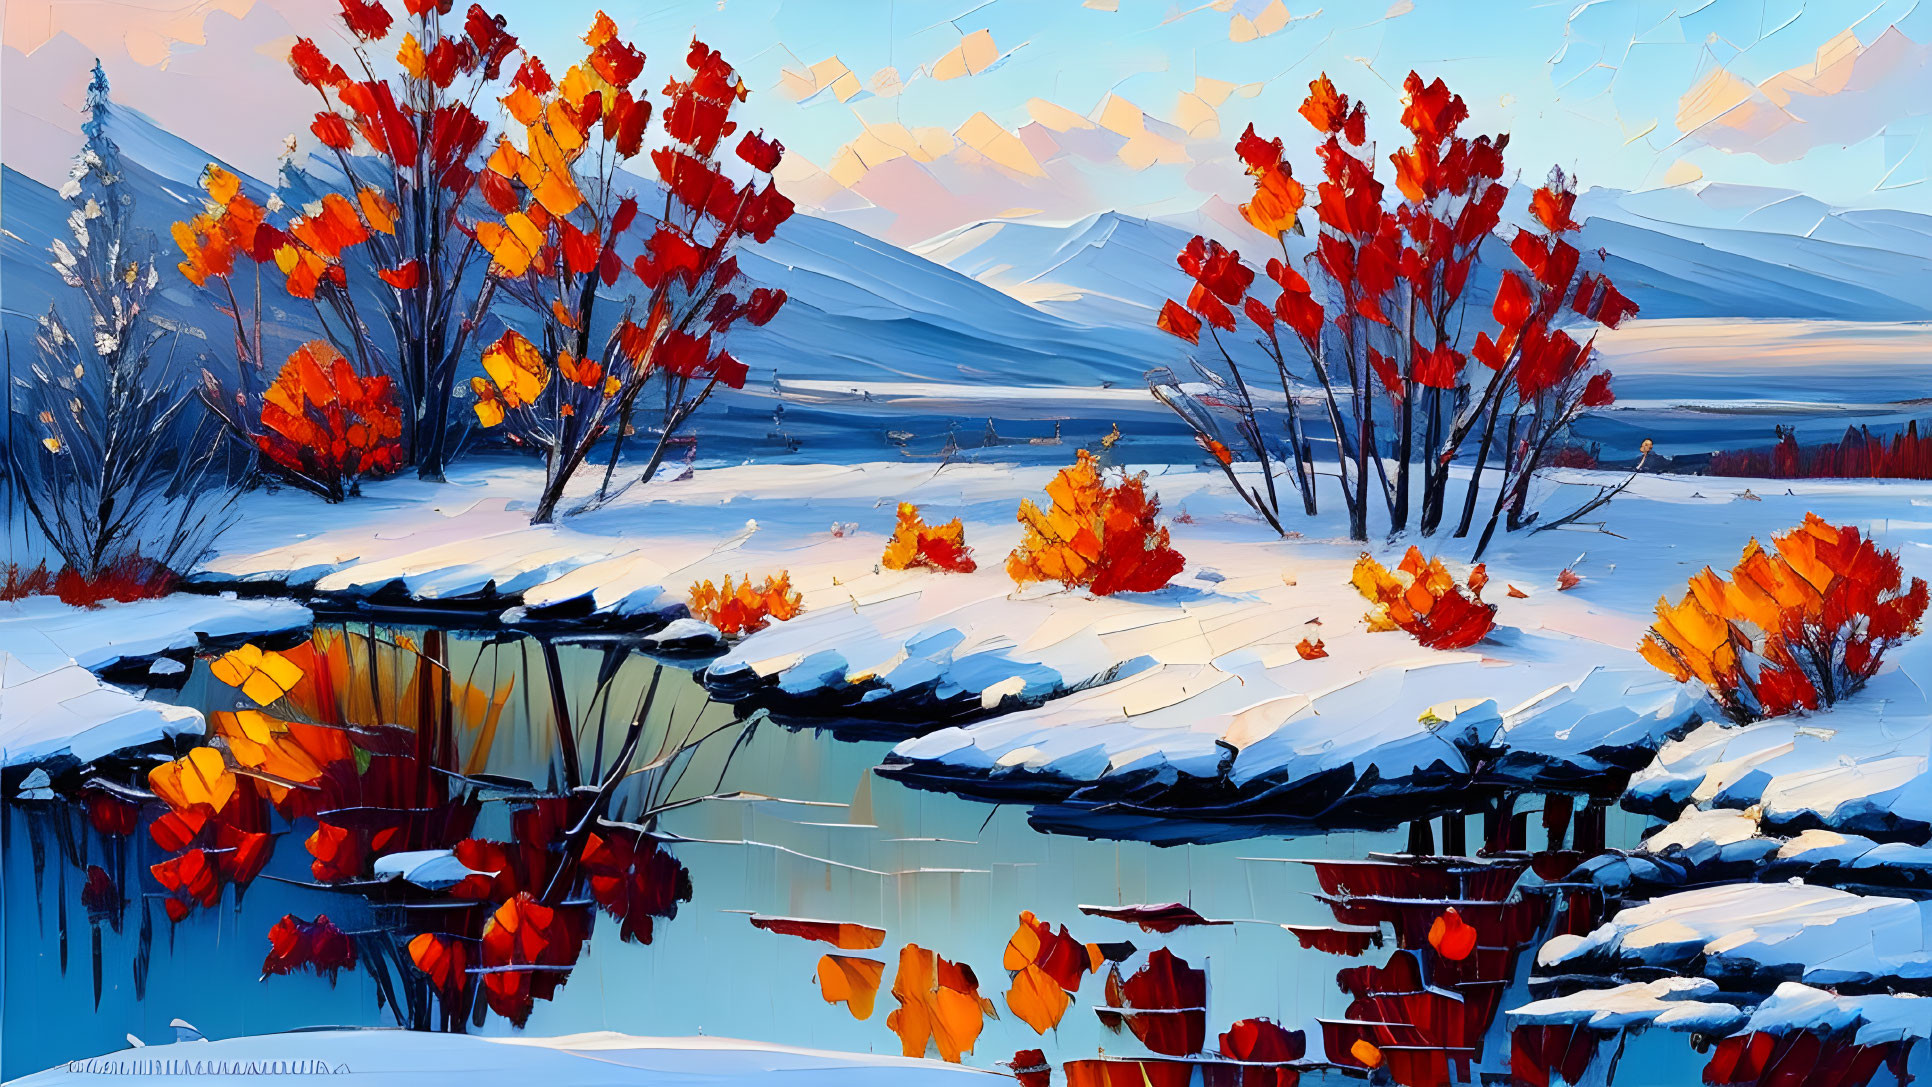 Scenic winter landscape with red and orange foliage by serene lake